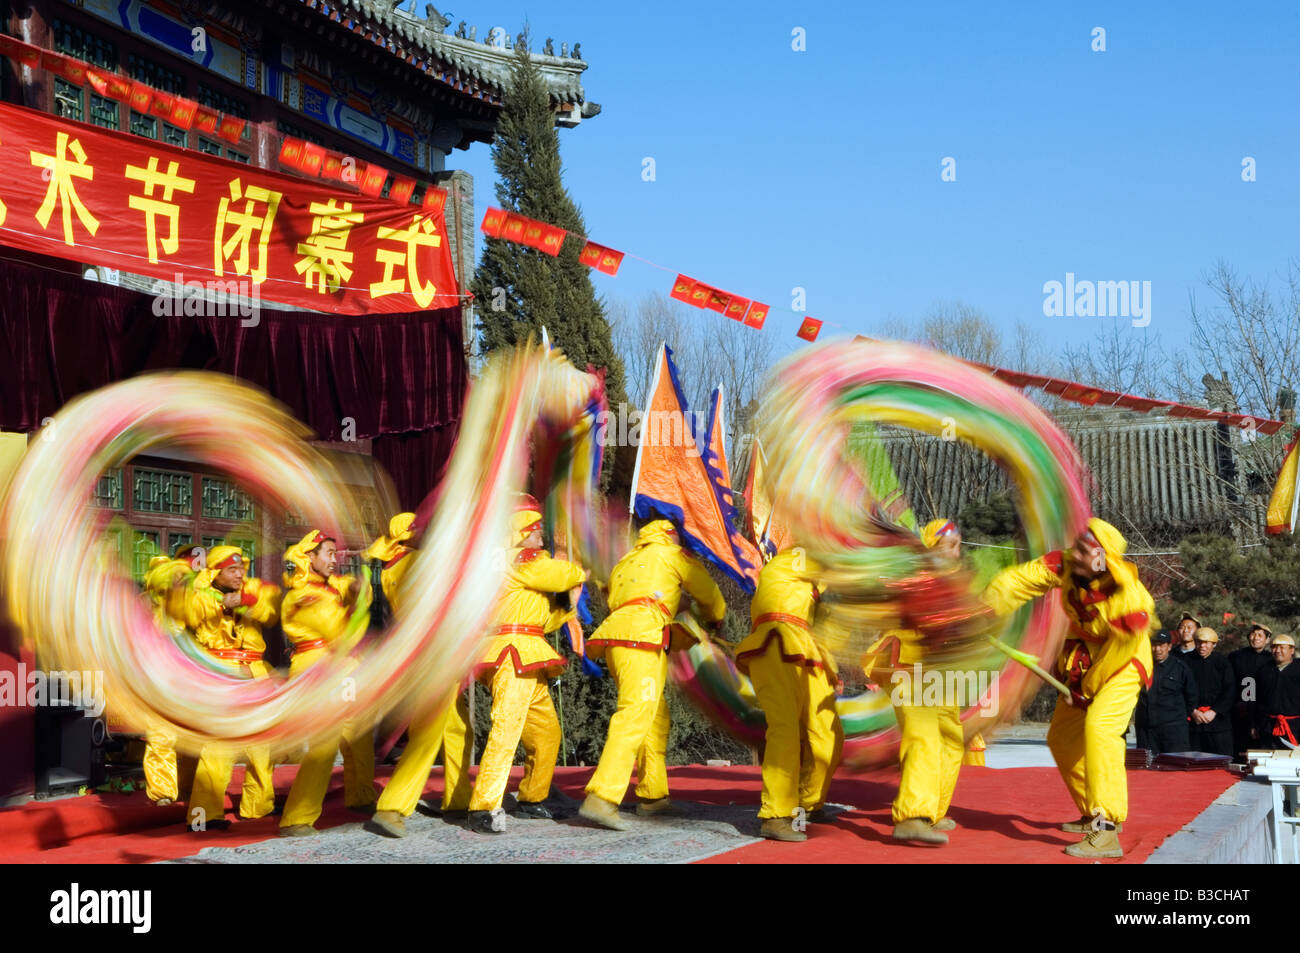 China, Beijing. Beiputuo temple and film studio. Chinese New Year Spring Festival - Dragon Dance performers. Stock Photo